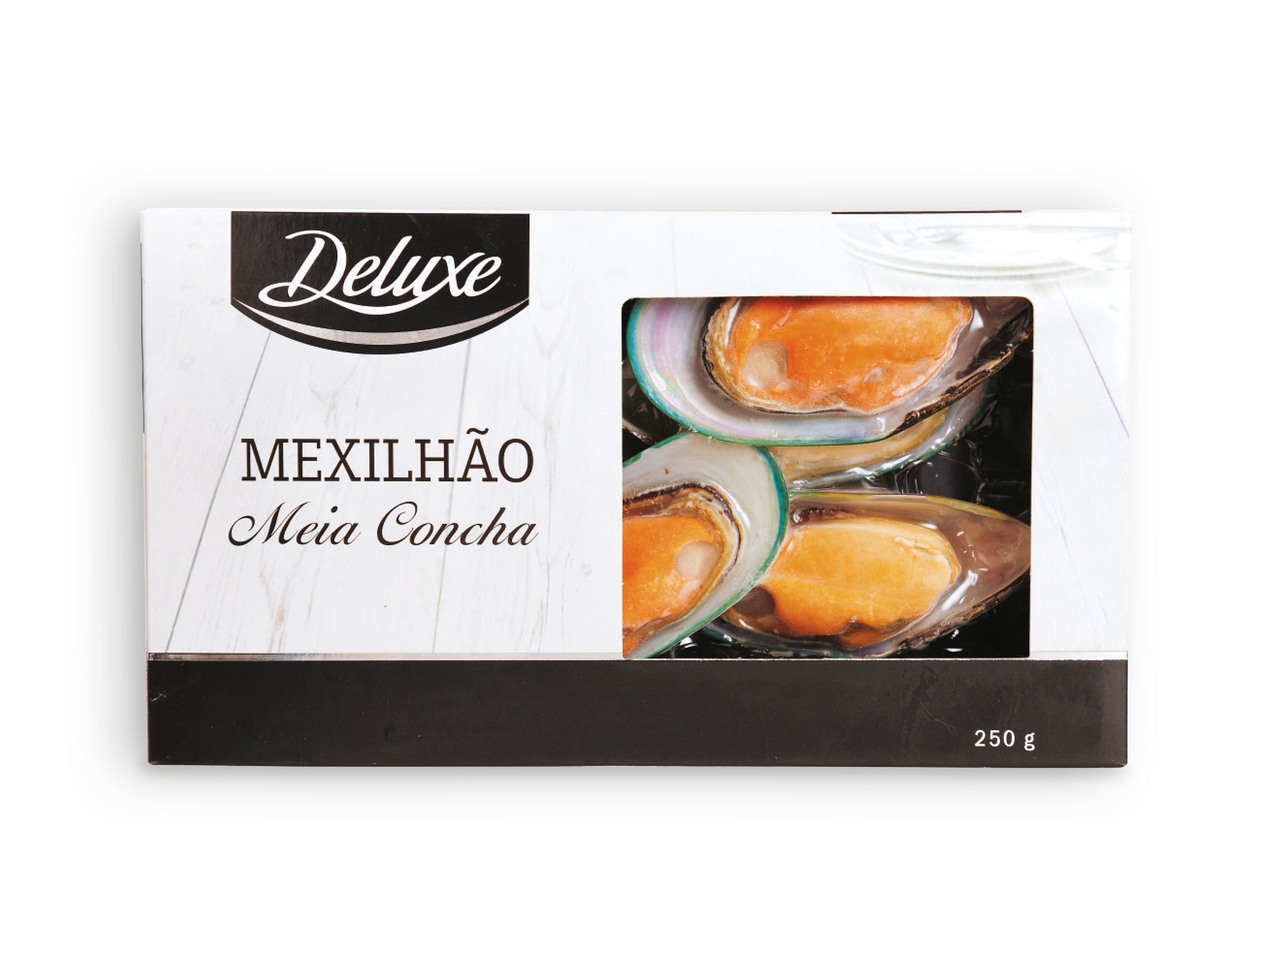 DELUXE(R) Mexilhão Meia Concha